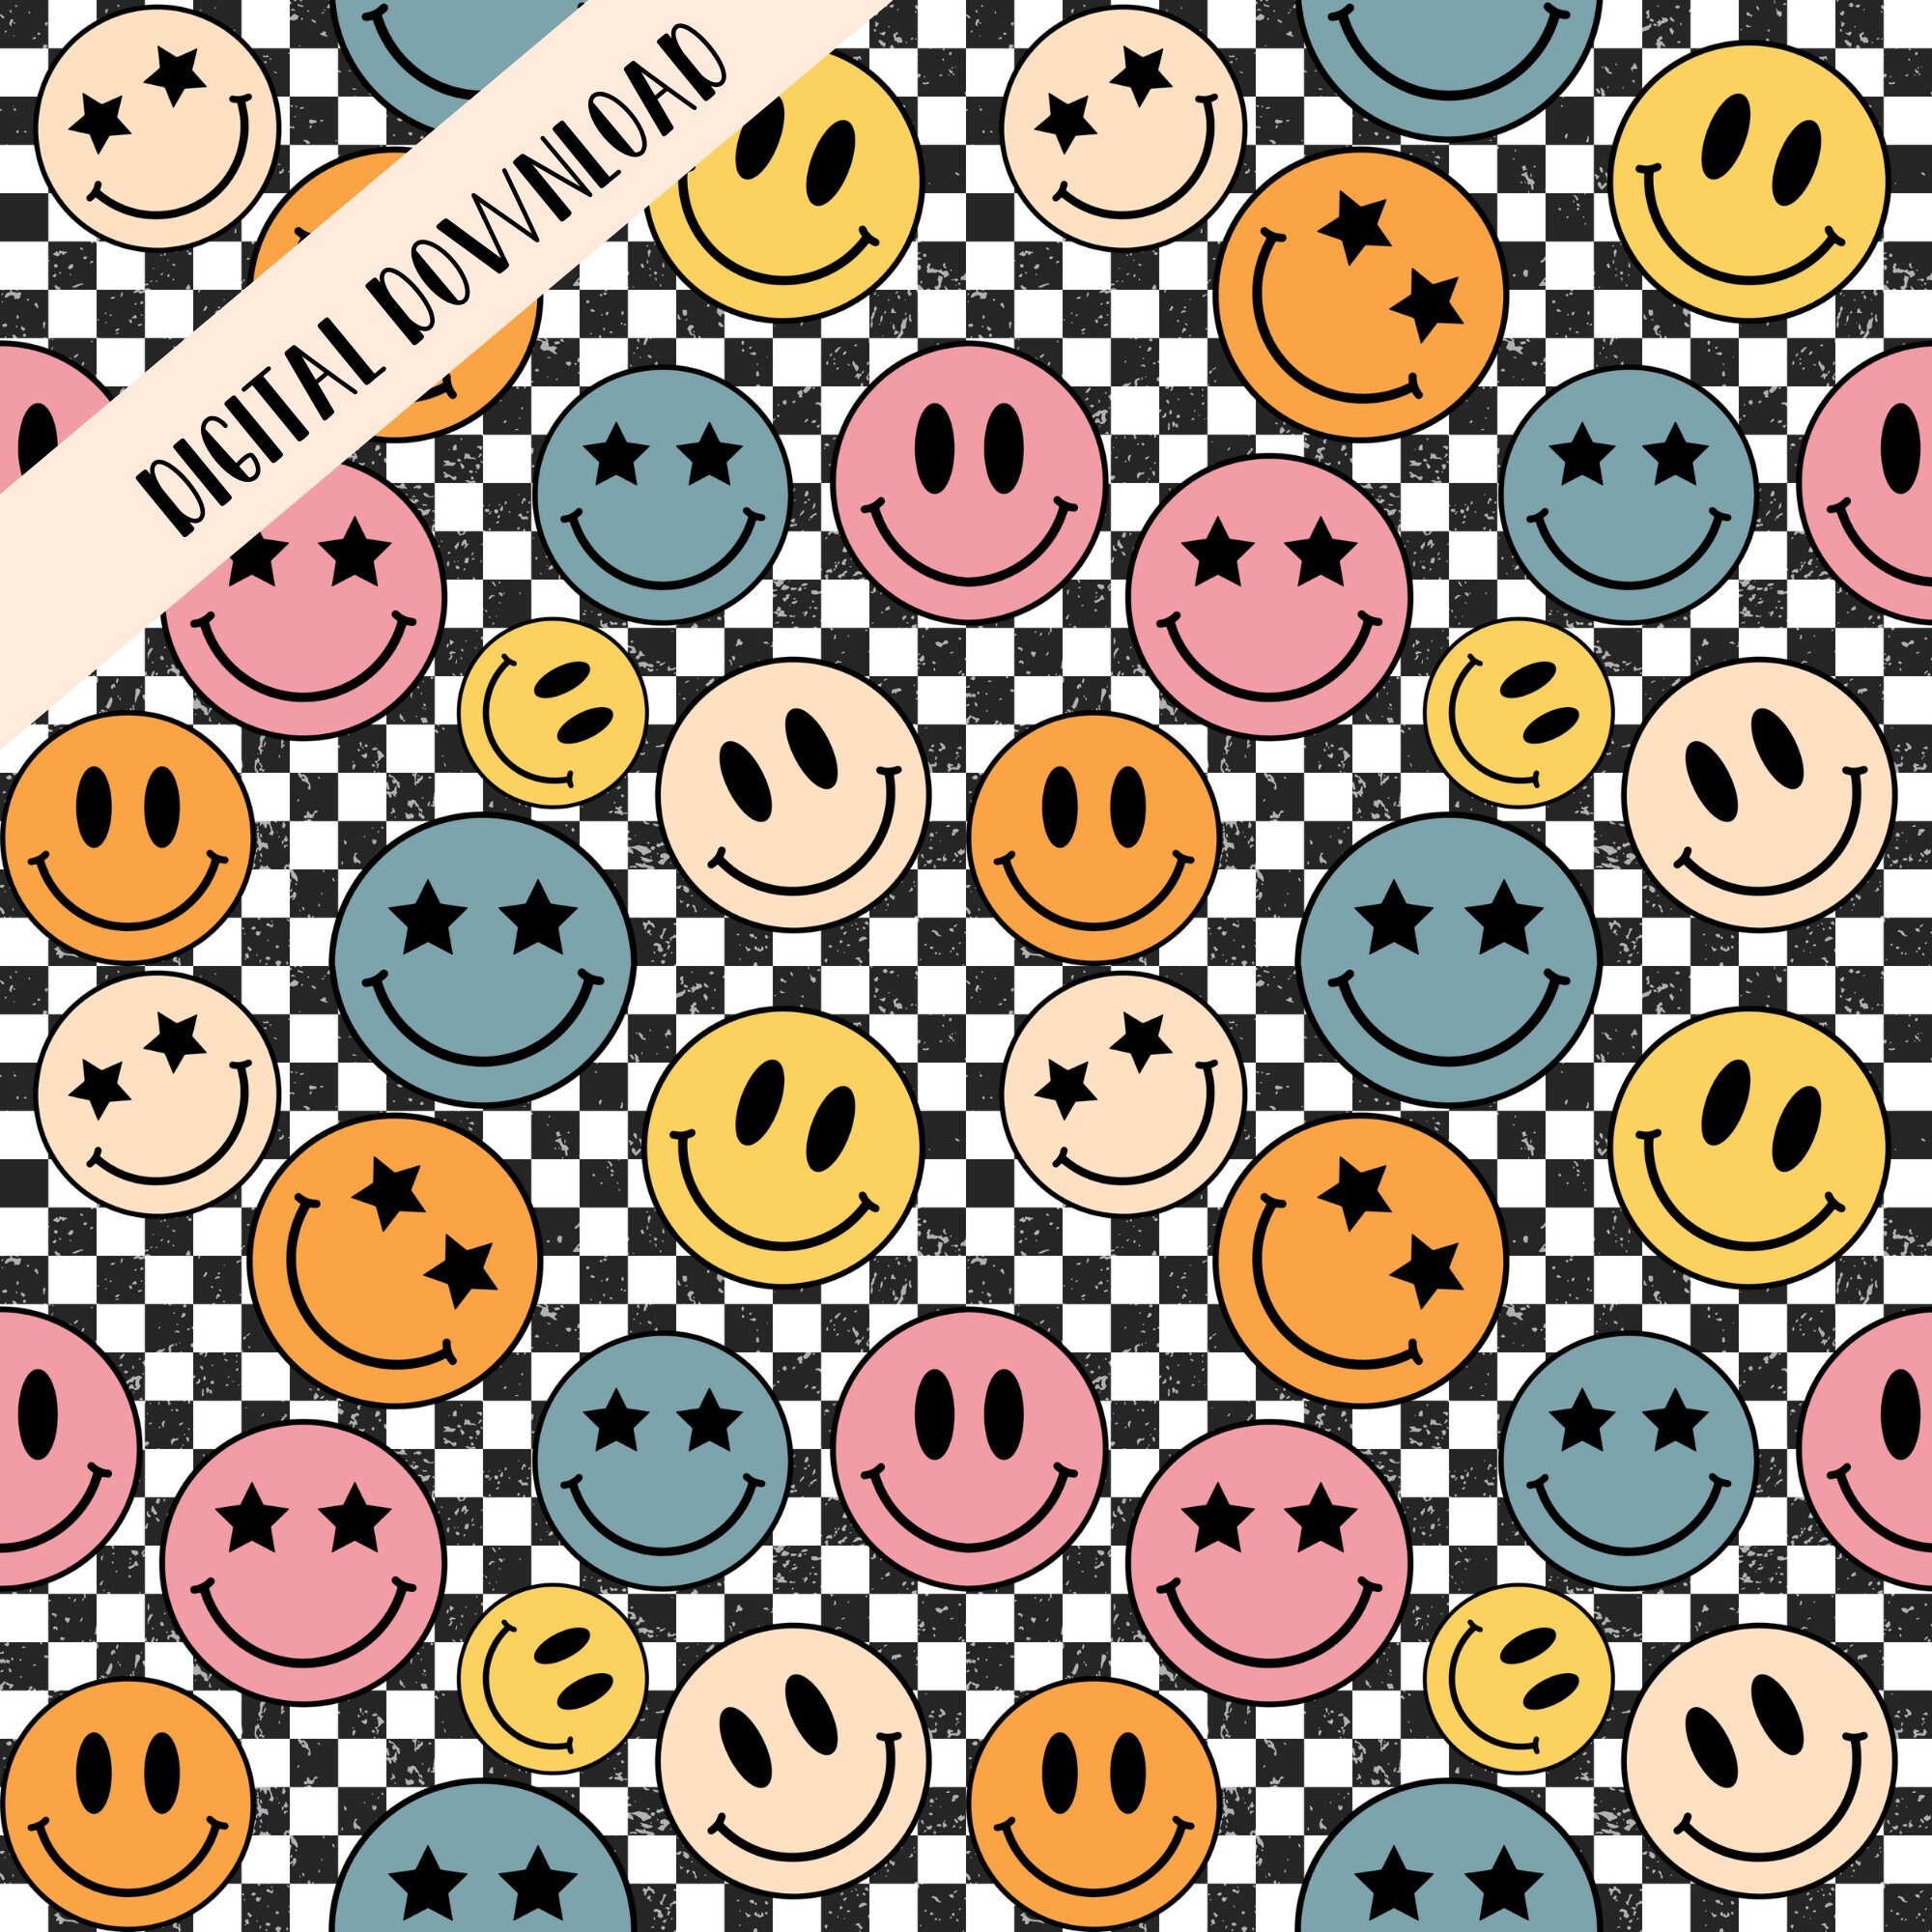 Melted Smiley Faces And Flowers Trippy Seamless Pattern Retro Hippie  Psychedelic Distorted Emoji Lava Lamp Smiley Face Vector Wallpaper Stock  Illustration  Download Image Now  iStock